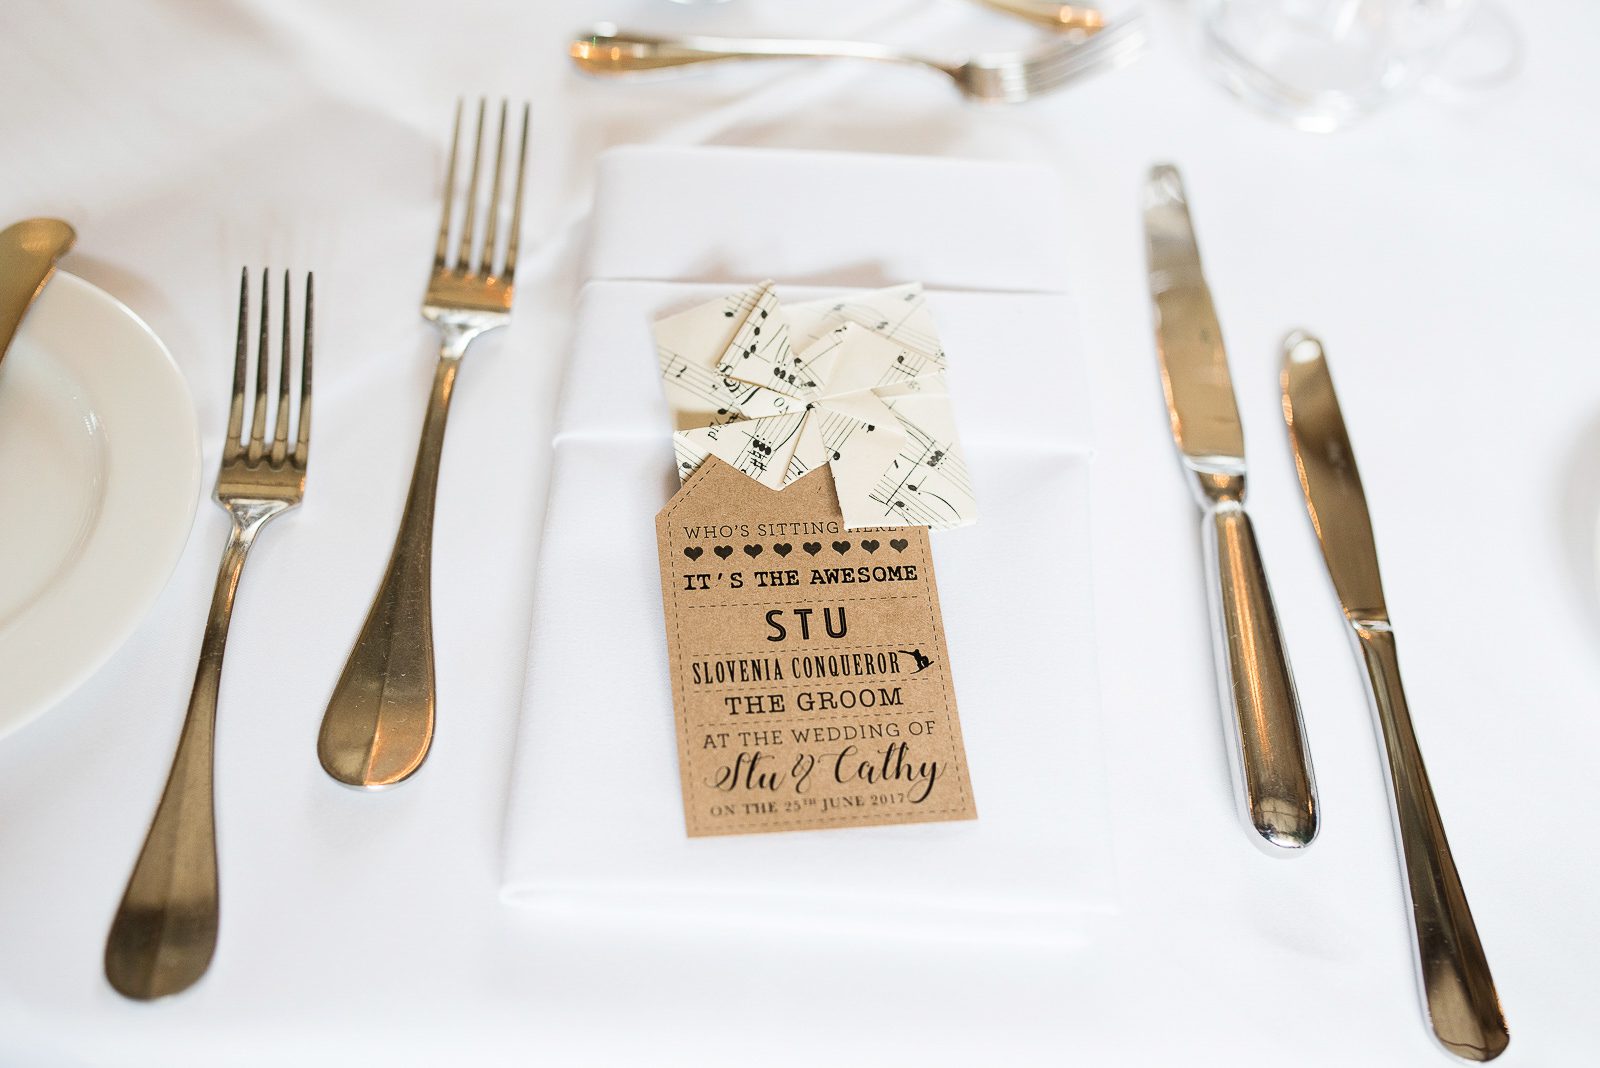 Wedding breakfast place settings for the groom